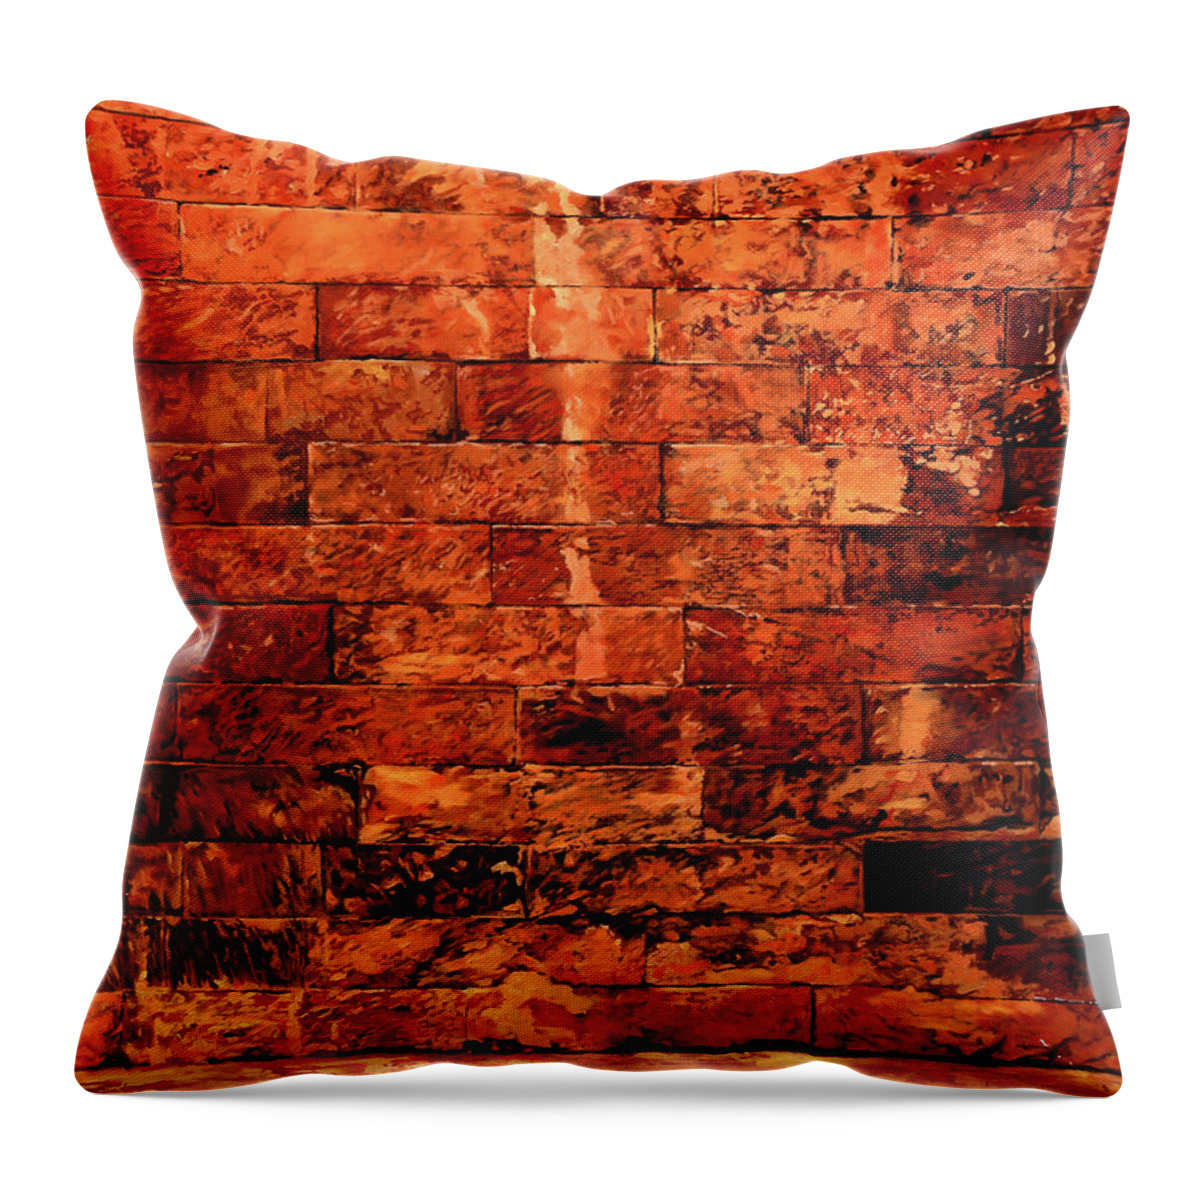 Wall Throw Pillow featuring the painting Un Po' Per Ridere by Guido Borelli